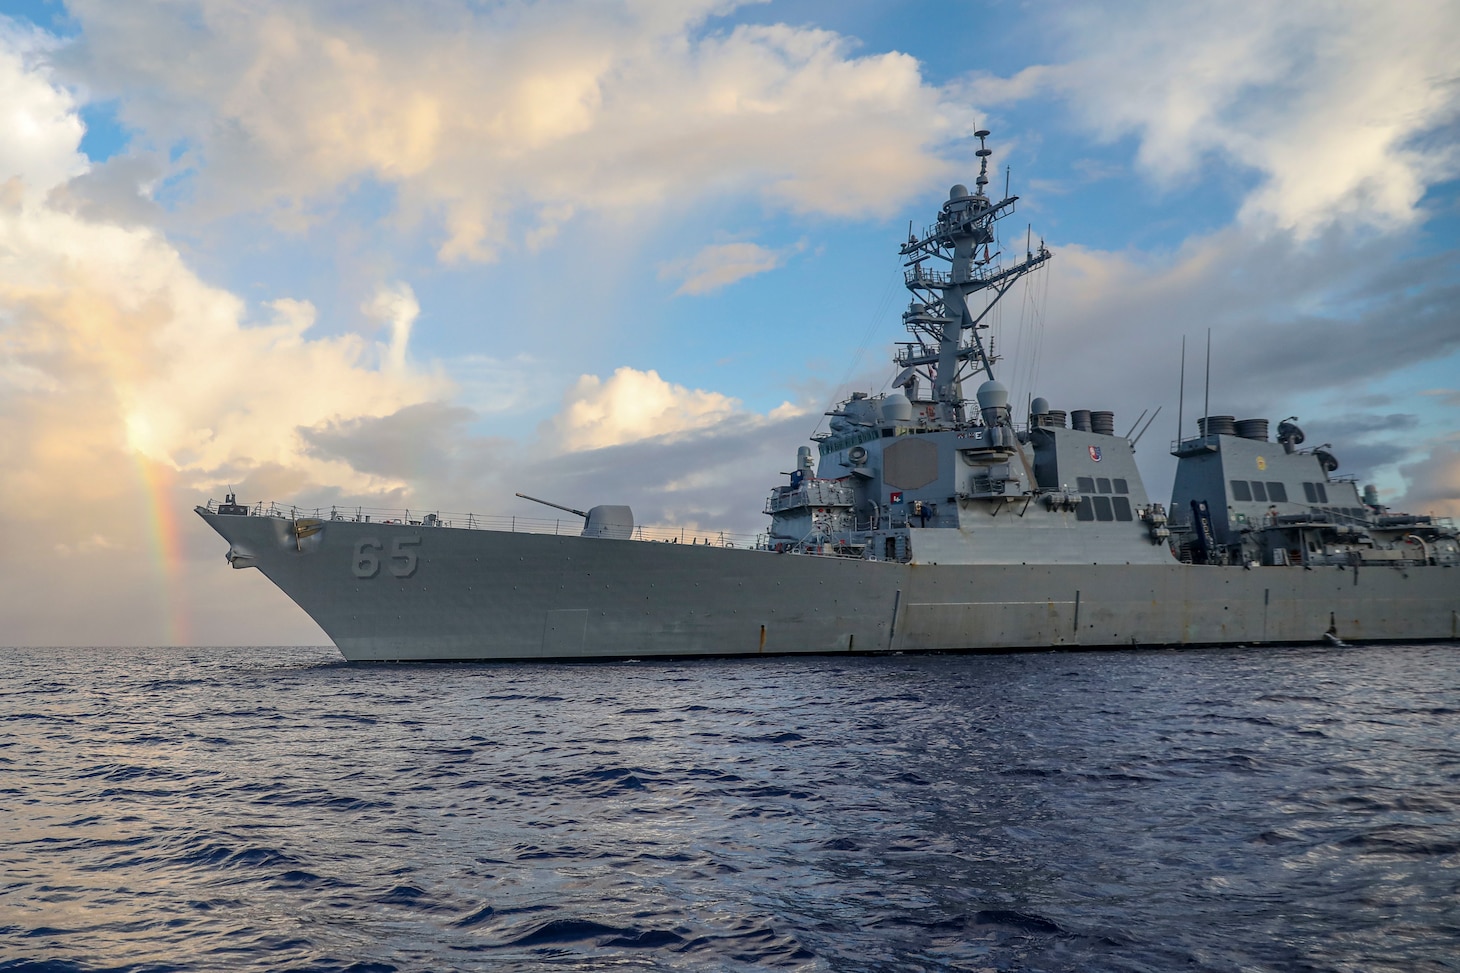 PHILIPPINE SEA (June 24, 2022) Arleigh Burke-class guided-missile destroyer USS Benfold (DDG 65) conducts routine underway operations. Benfold is assigned to Commander, Task Force (CTF) 71/Destroyer Squadron (DESRON) 15, the Navy’s largest forward-deployed DESRON and the U.S. 7th Fleet’s principal surface force. (U.S. Navy photo by Mass Communication Specialist 2nd Class Arthur Rosen)